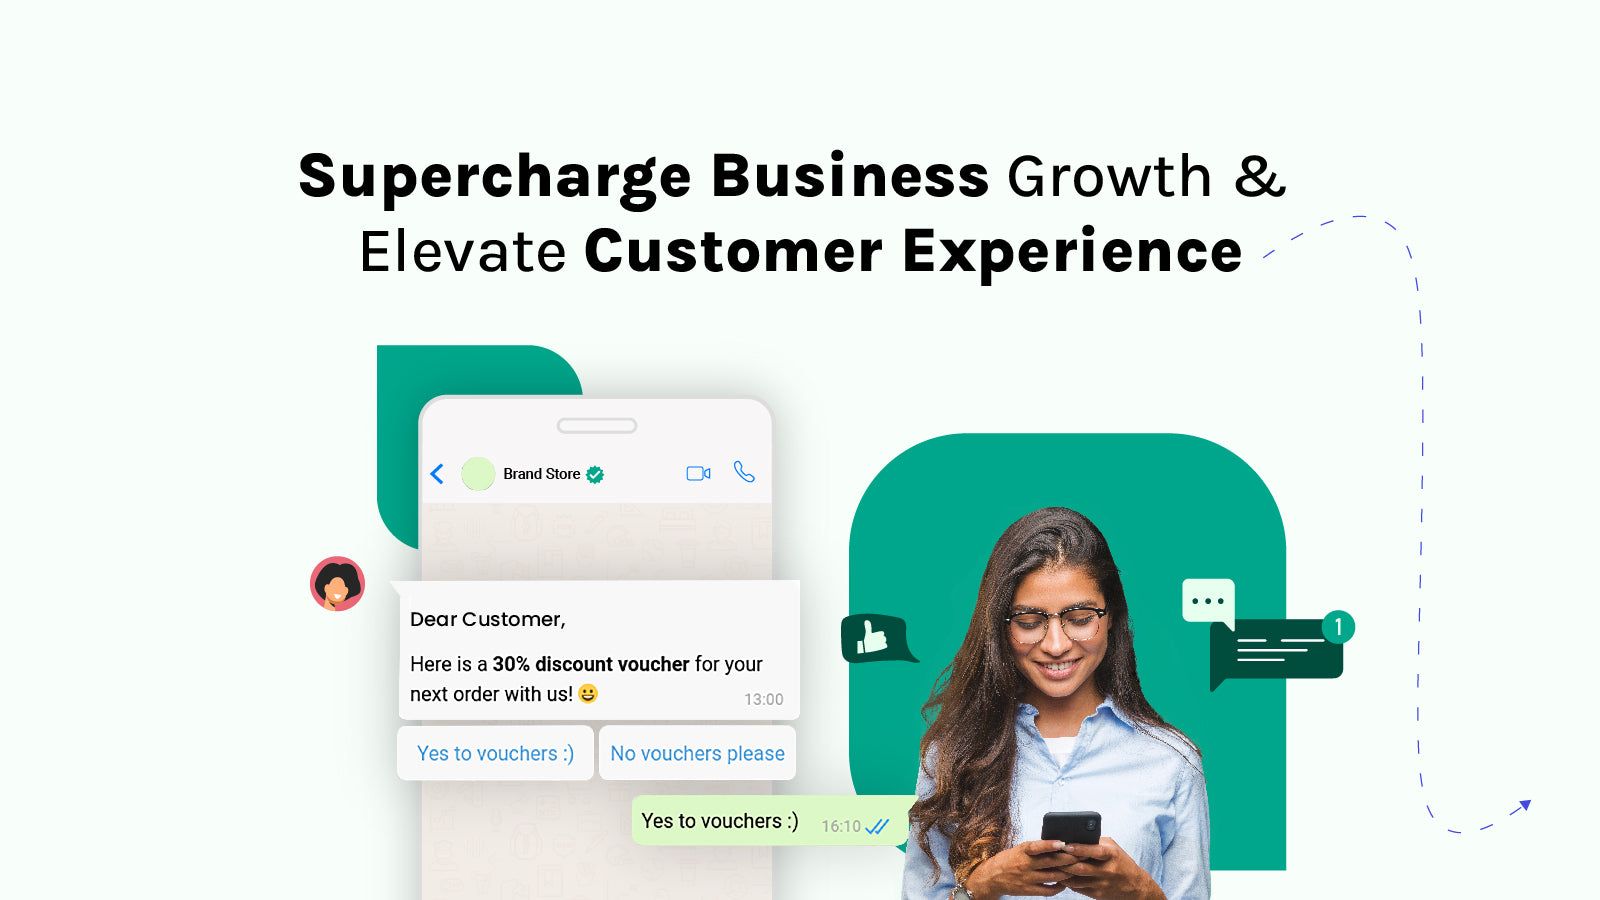 Supercharge Business Growth & Elevate Customer Experience